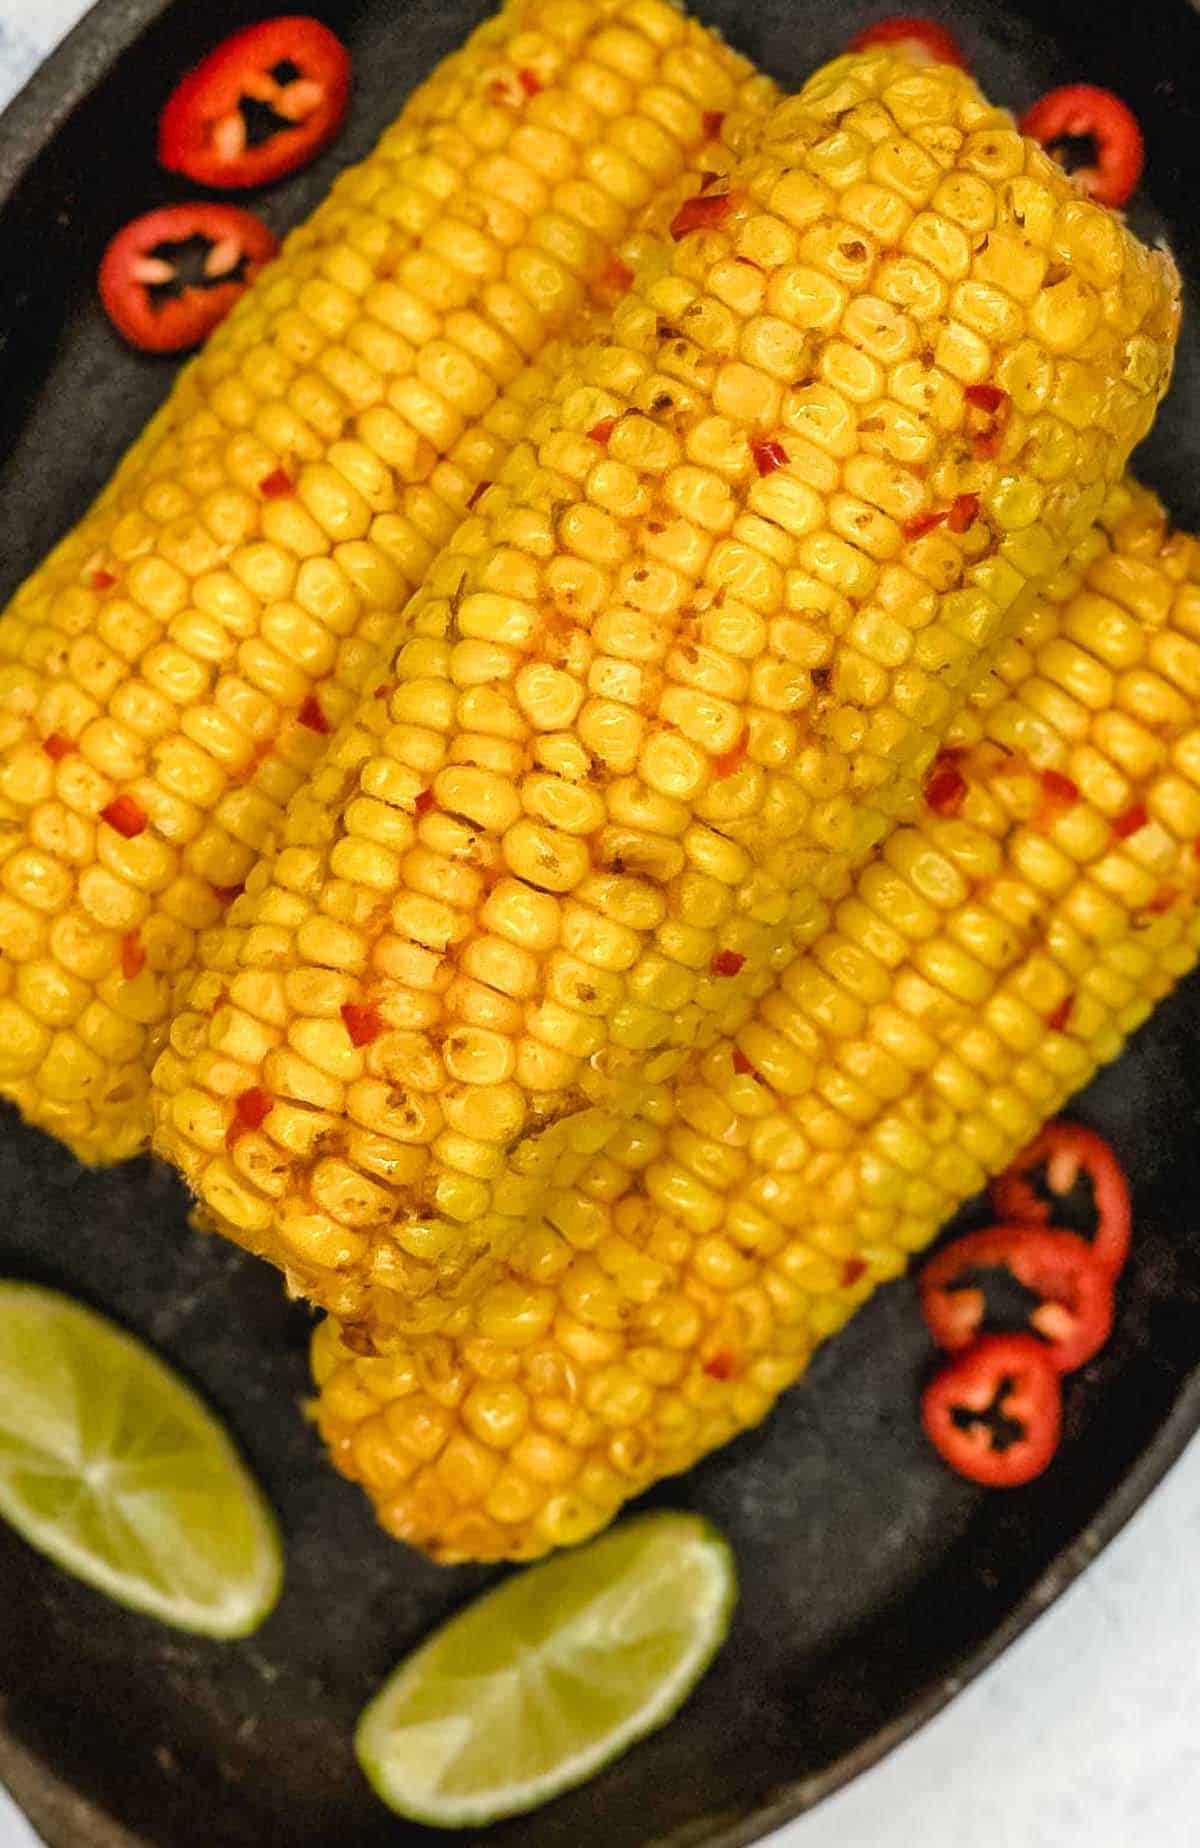 Chili and lime corn on the cob with lime wedges and red chili peppers.